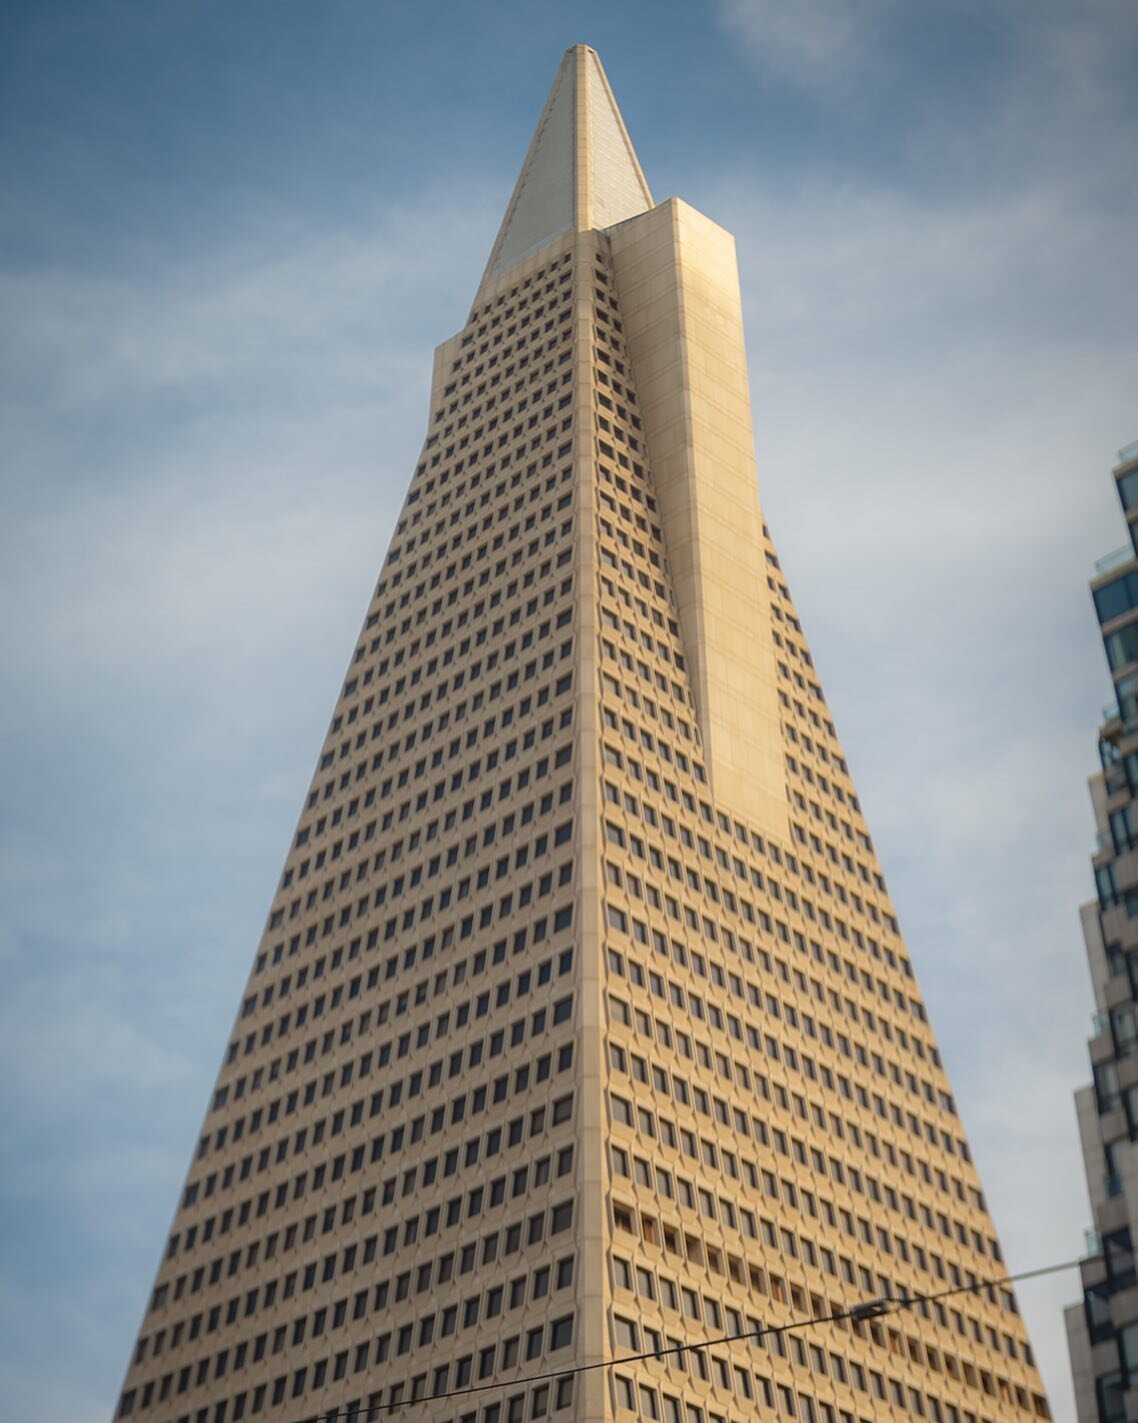 「 Pyramid of the Bay 」
The 2nd tallest skyscraper in SF. The facade of the building is cover in crushed quartz which gives it it&rsquo;s light color.
.
.
#transamerica #sf #skyscraper #streetofsf #streetphotography #filmmaking #35mm #anamorphic #baya